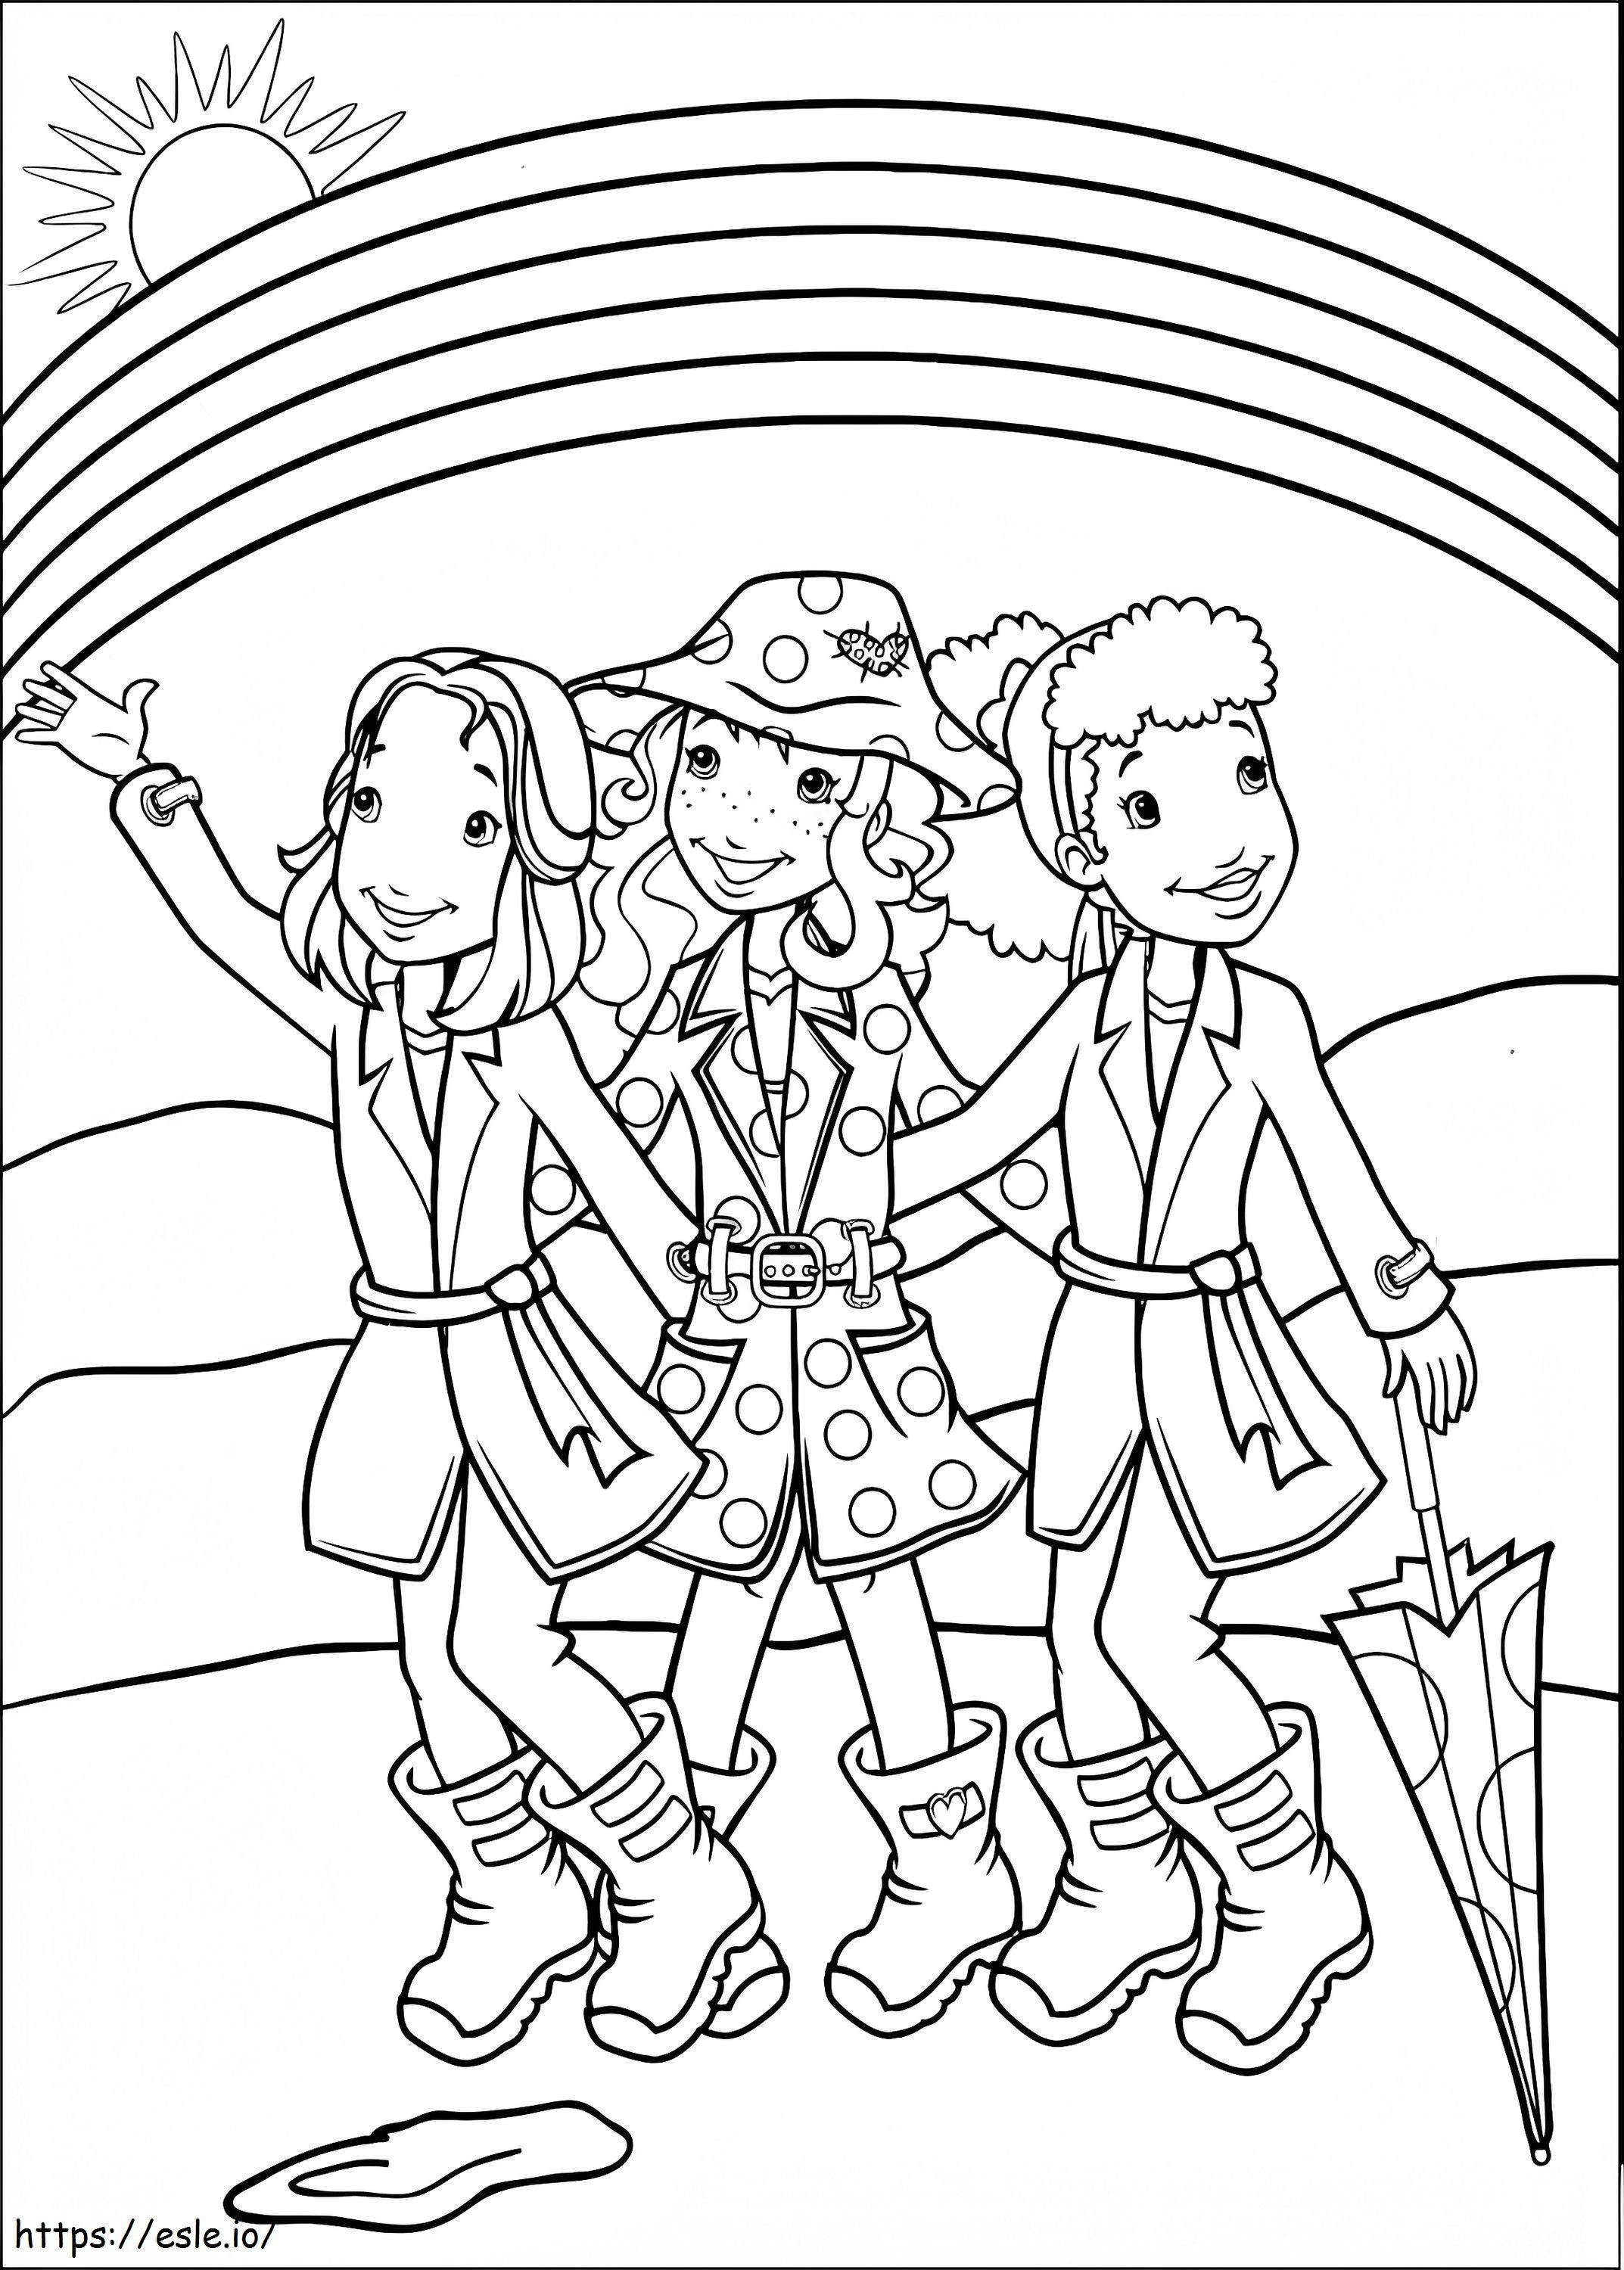 Holly Hobbie And Friends 3 coloring page